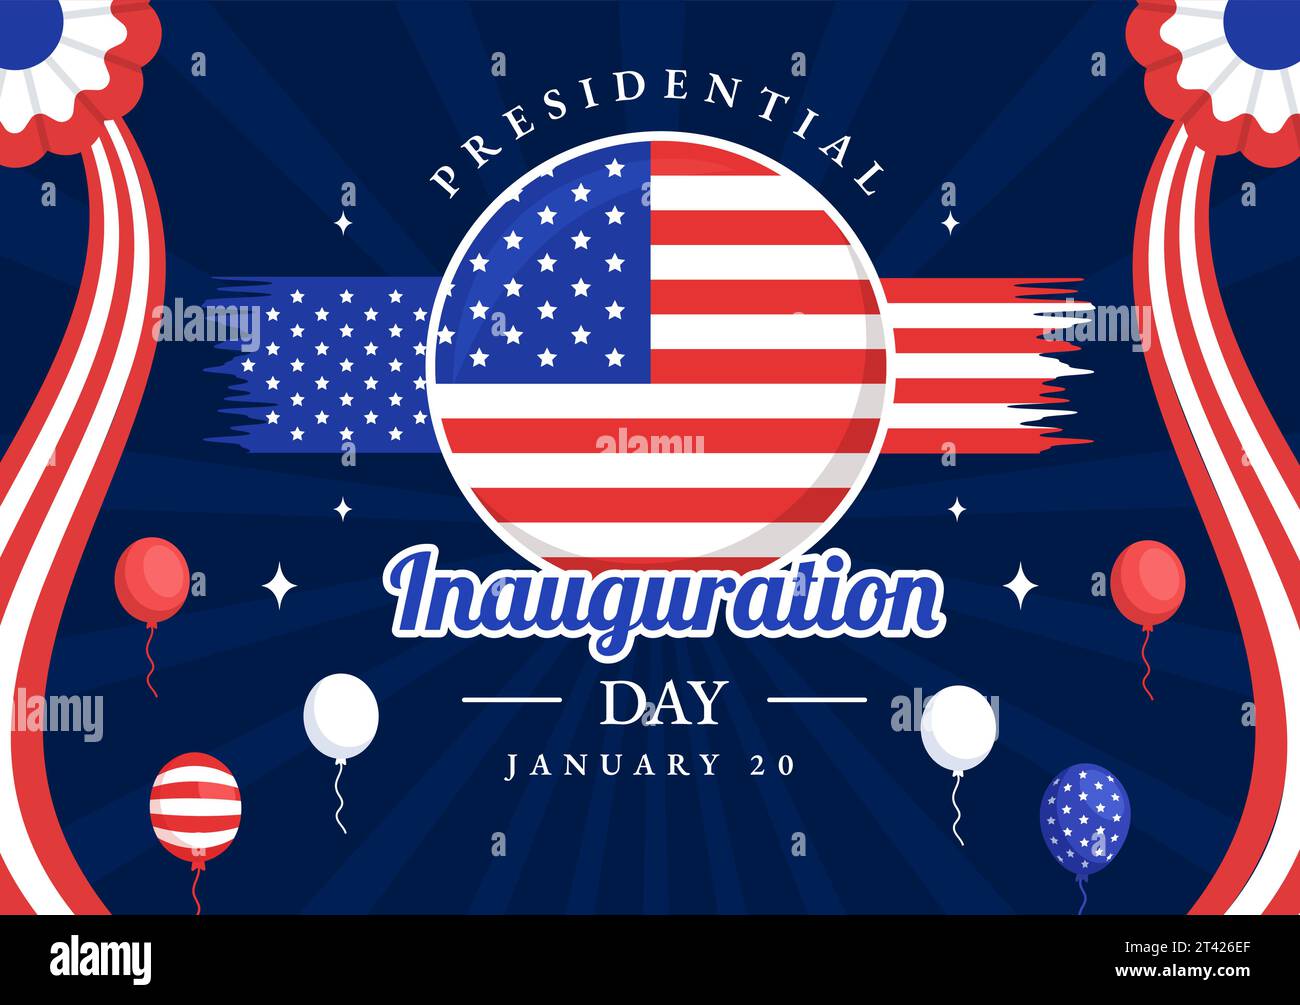 USA Presidential Inauguration Day Vector Illustration January 20 with Capitol Building Washington D.C. and American Flag in Background Design Stock Vector